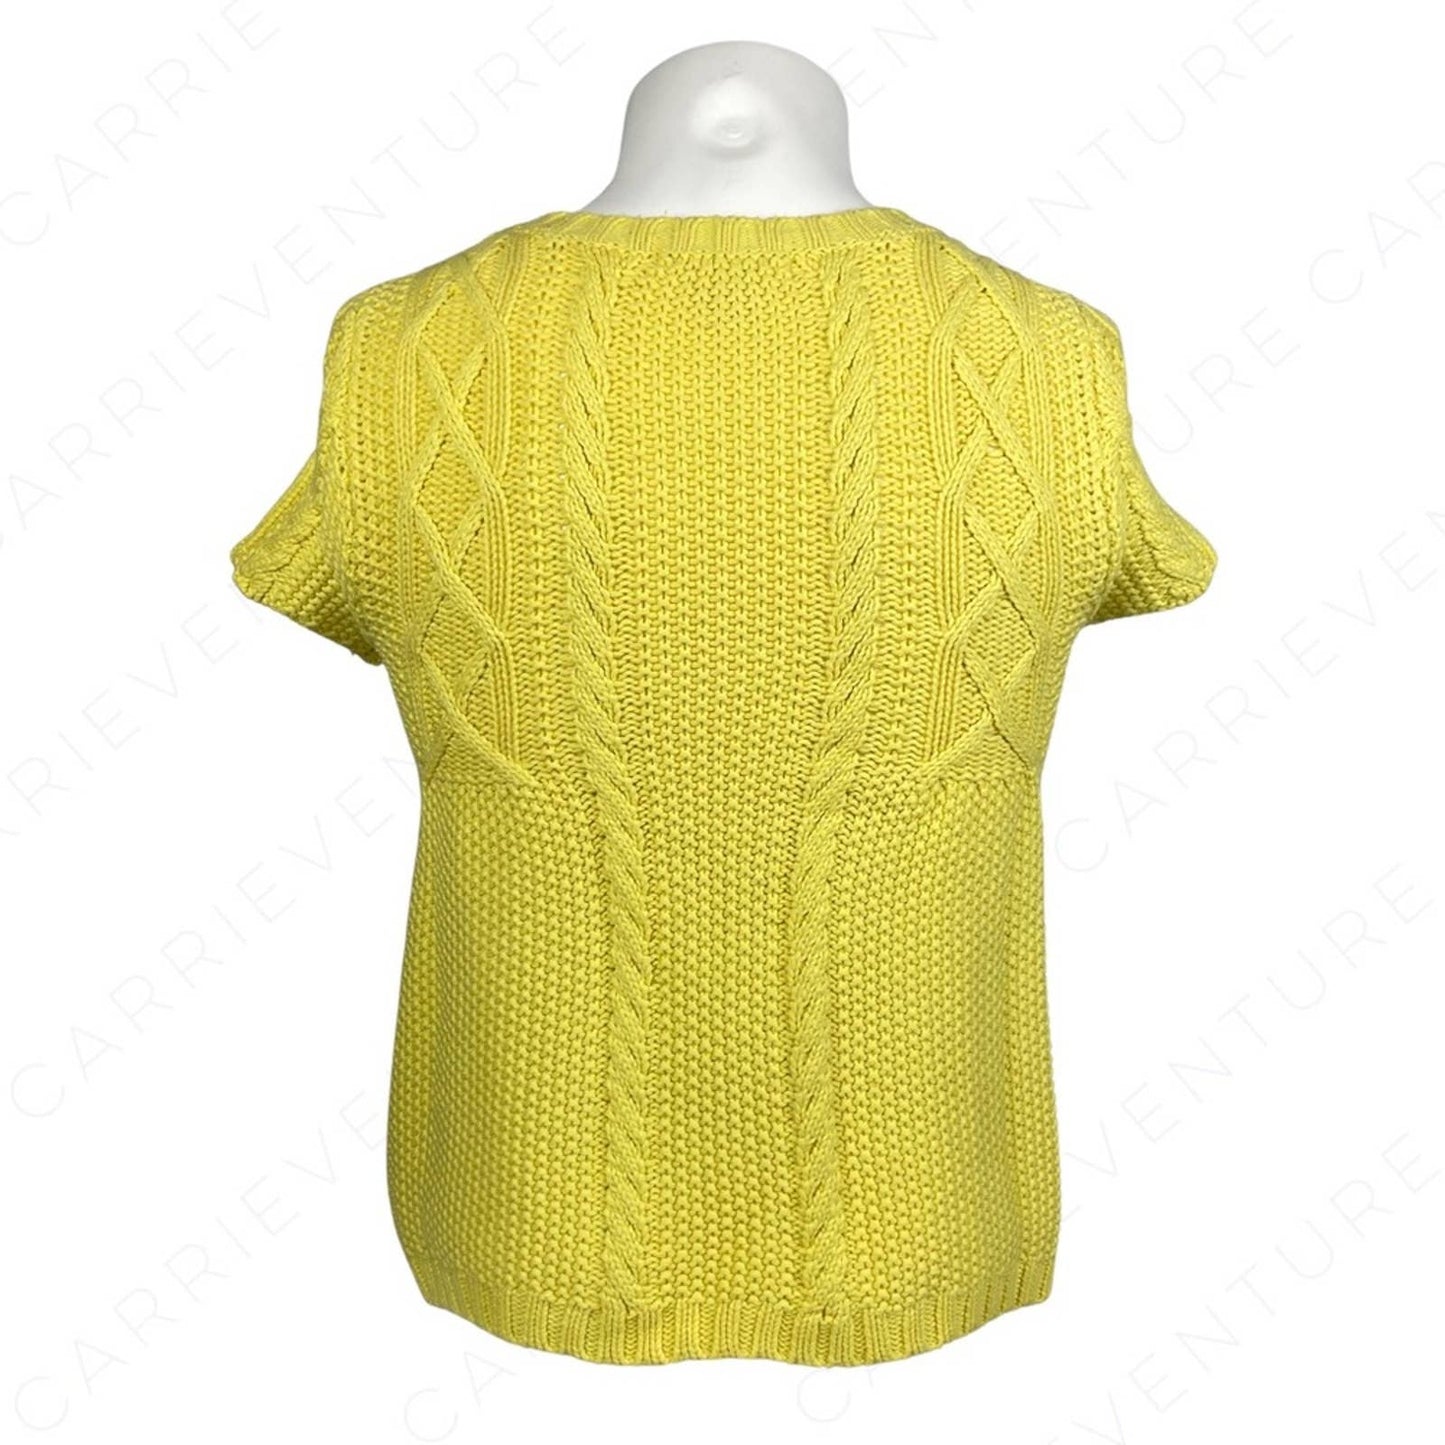 MICHAEL Michael Kors Yellow Short Sleeve Button Front Spring Cardigan Sweater Size S